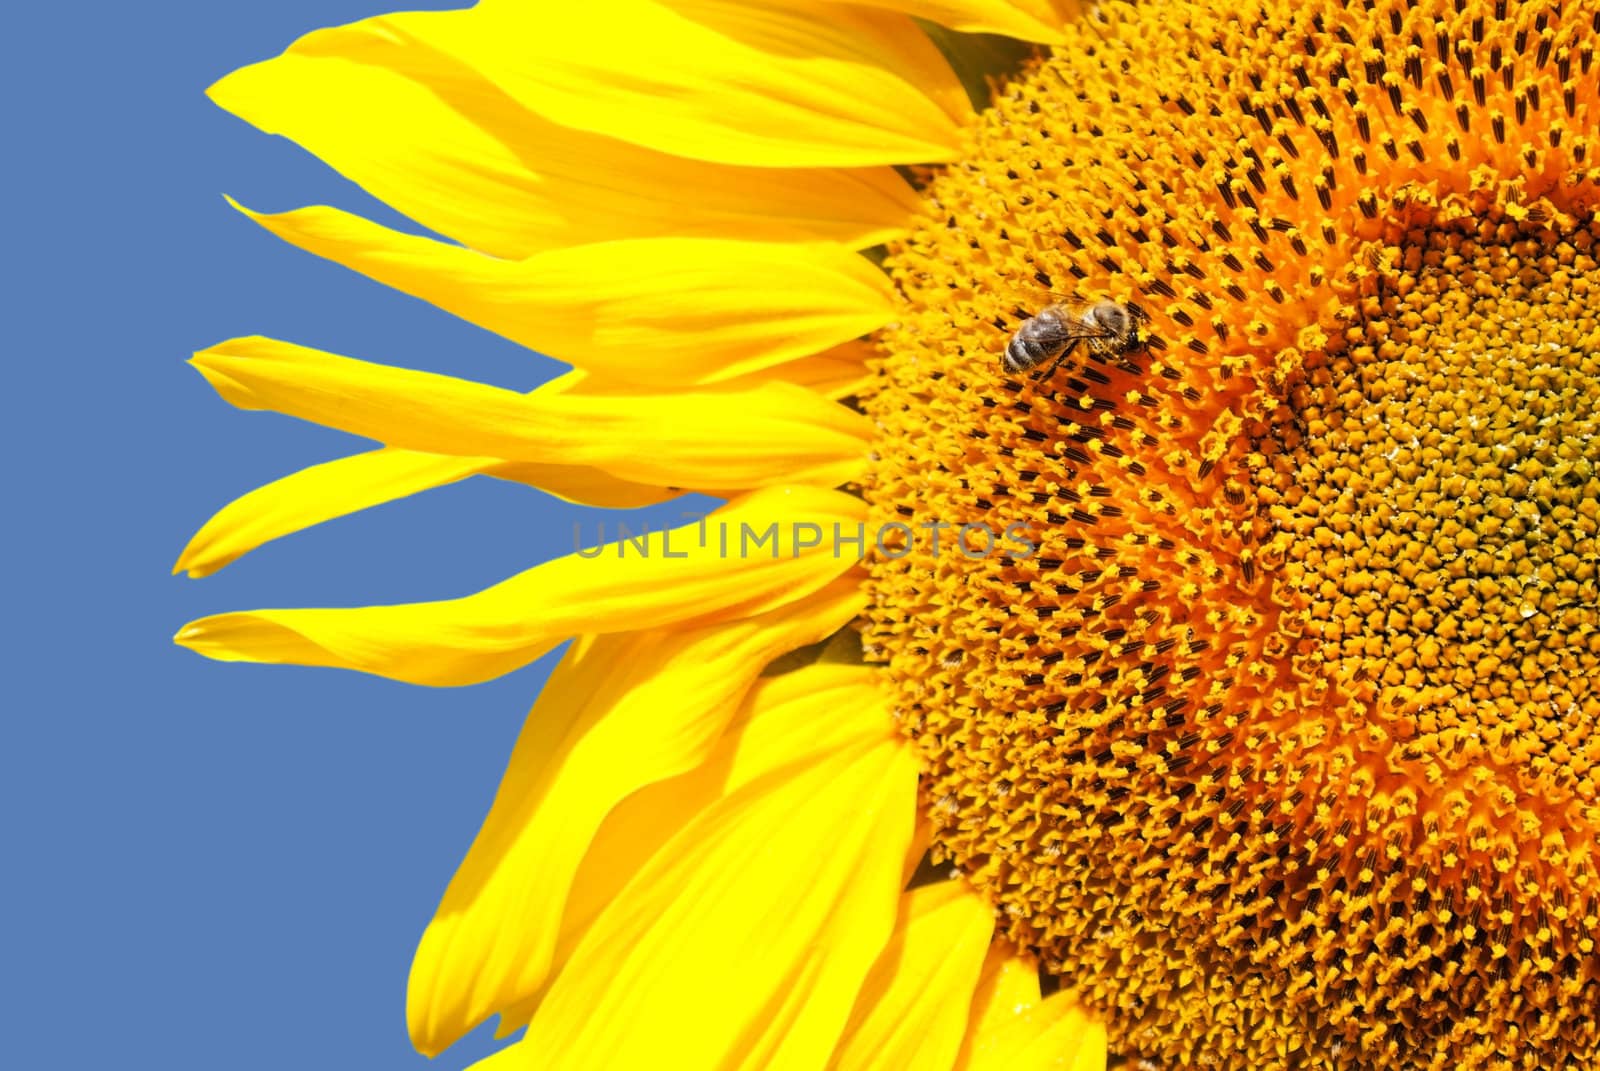 Sunflower head's close up with a bee against blue sky by AndreyKr